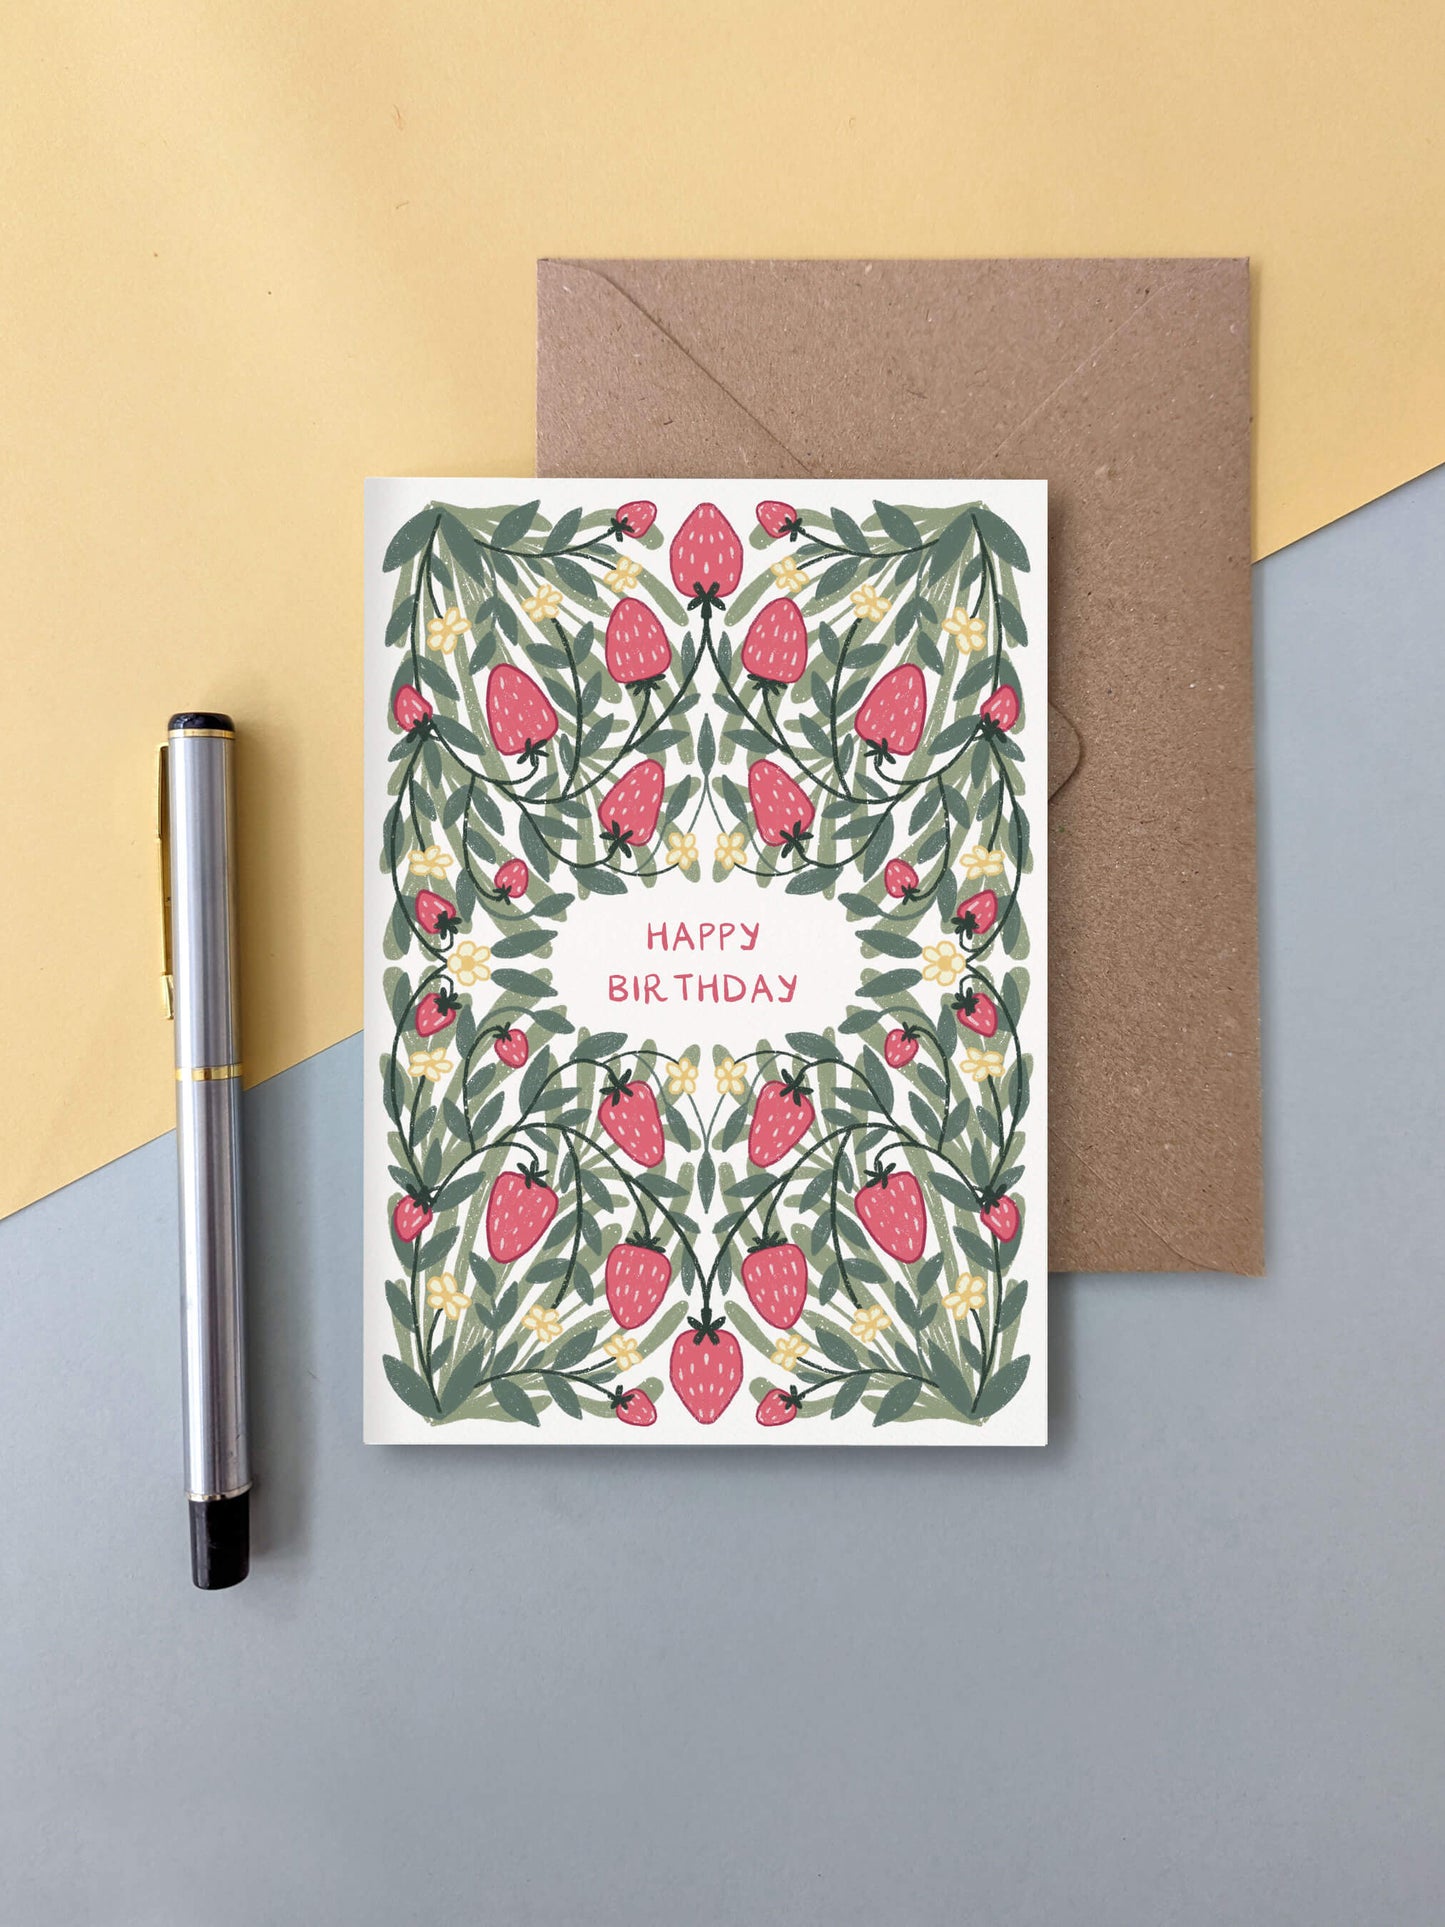 Happy birthday with strawberry pattern – floral greeting card